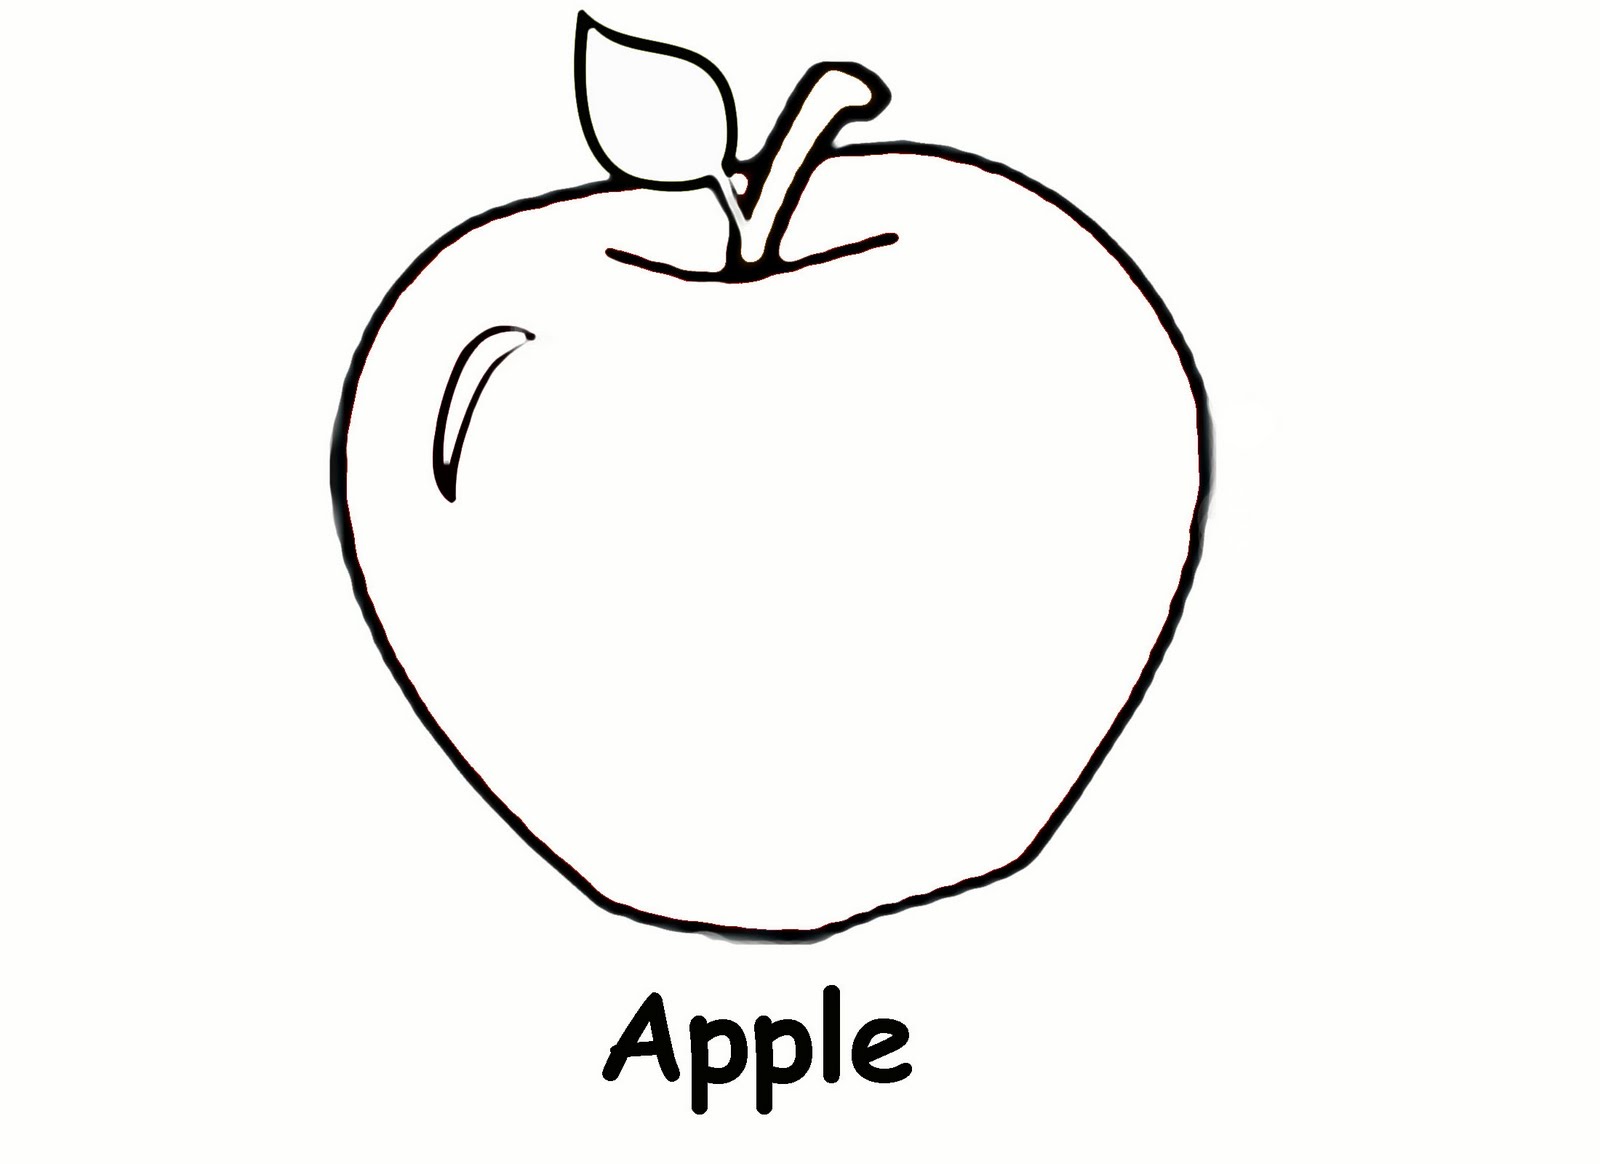 Apple Fruit S20 Coloring Pages   Coloring Cool